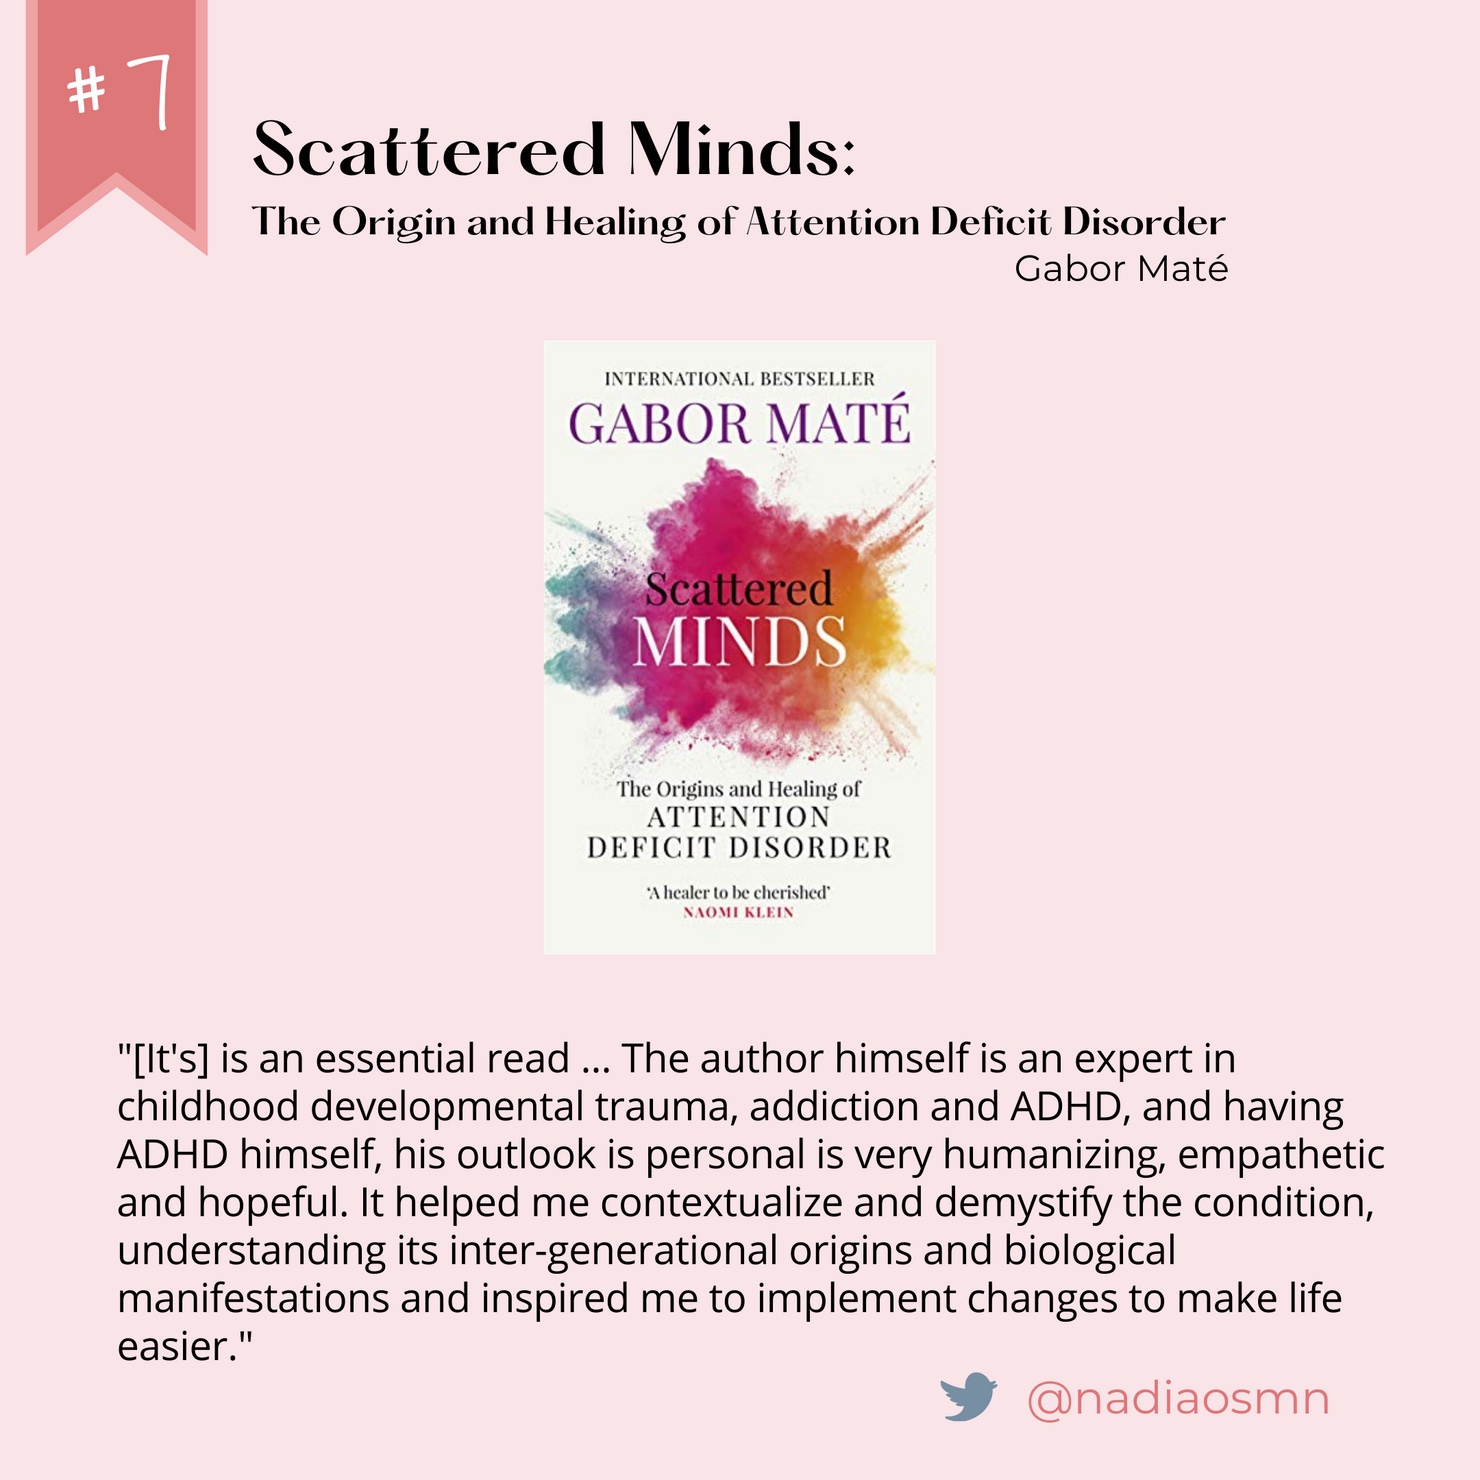 Number 7: Scattered Minds - The Origin and Healing of Attention Deficit Disorder. Written by Gabriel Mate. Quote from @nadiaosmn on Twitter: "[It's] is an essential read ... The author himself is an expert in childhood developmental trauma, addiction and ADHD, and having ADHD himself, his outlook is personal is very humanizing, empathetic and hopeful. It helped me contextualize and demystify the condition, understanding its inter-generational origins and biological manifestations and inspired me to implement changes to make life easier."